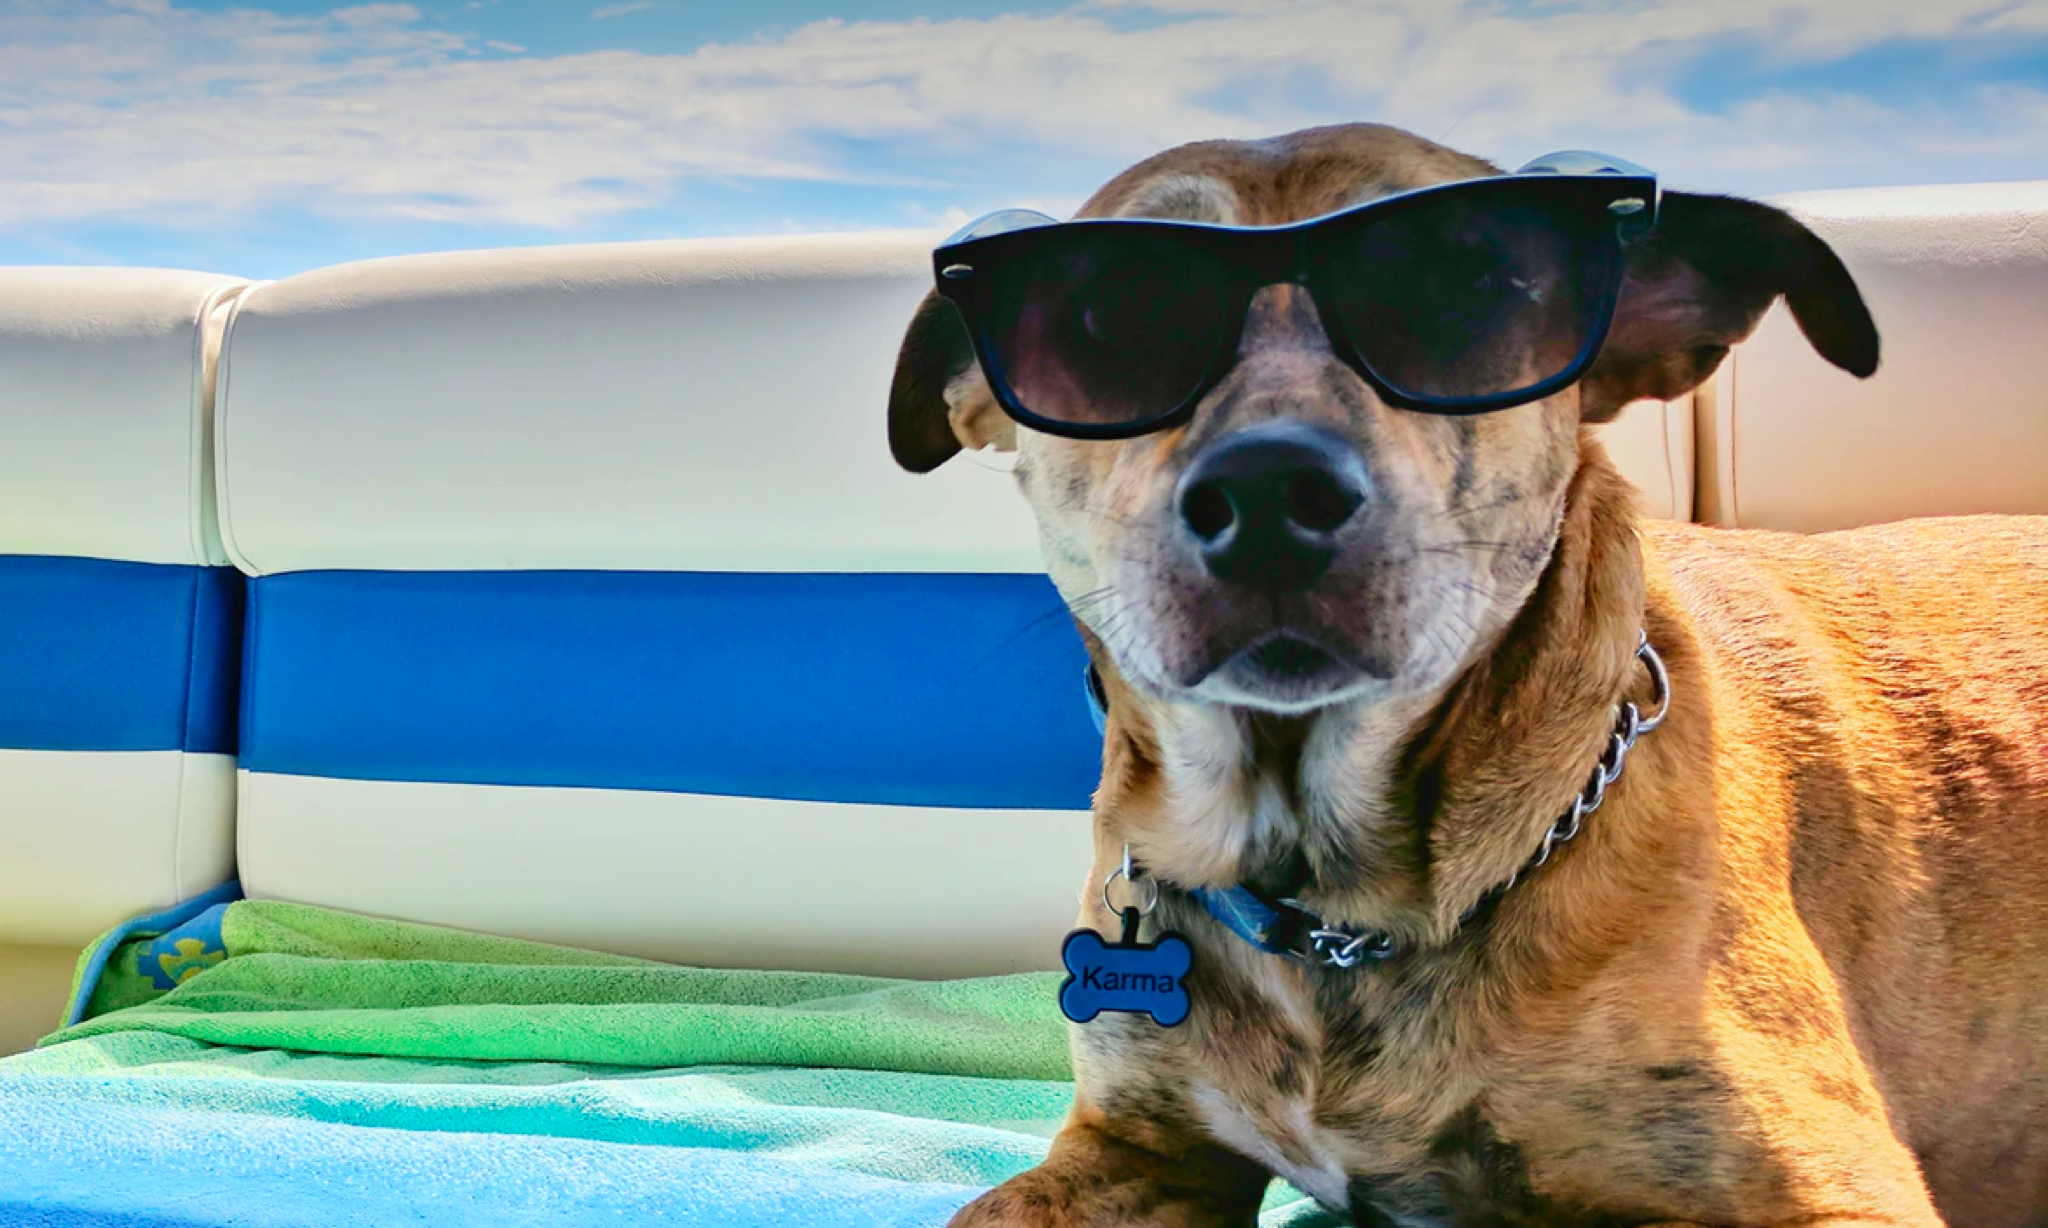 A dog basking in the sun on a beachtowel while wearing sunglasses